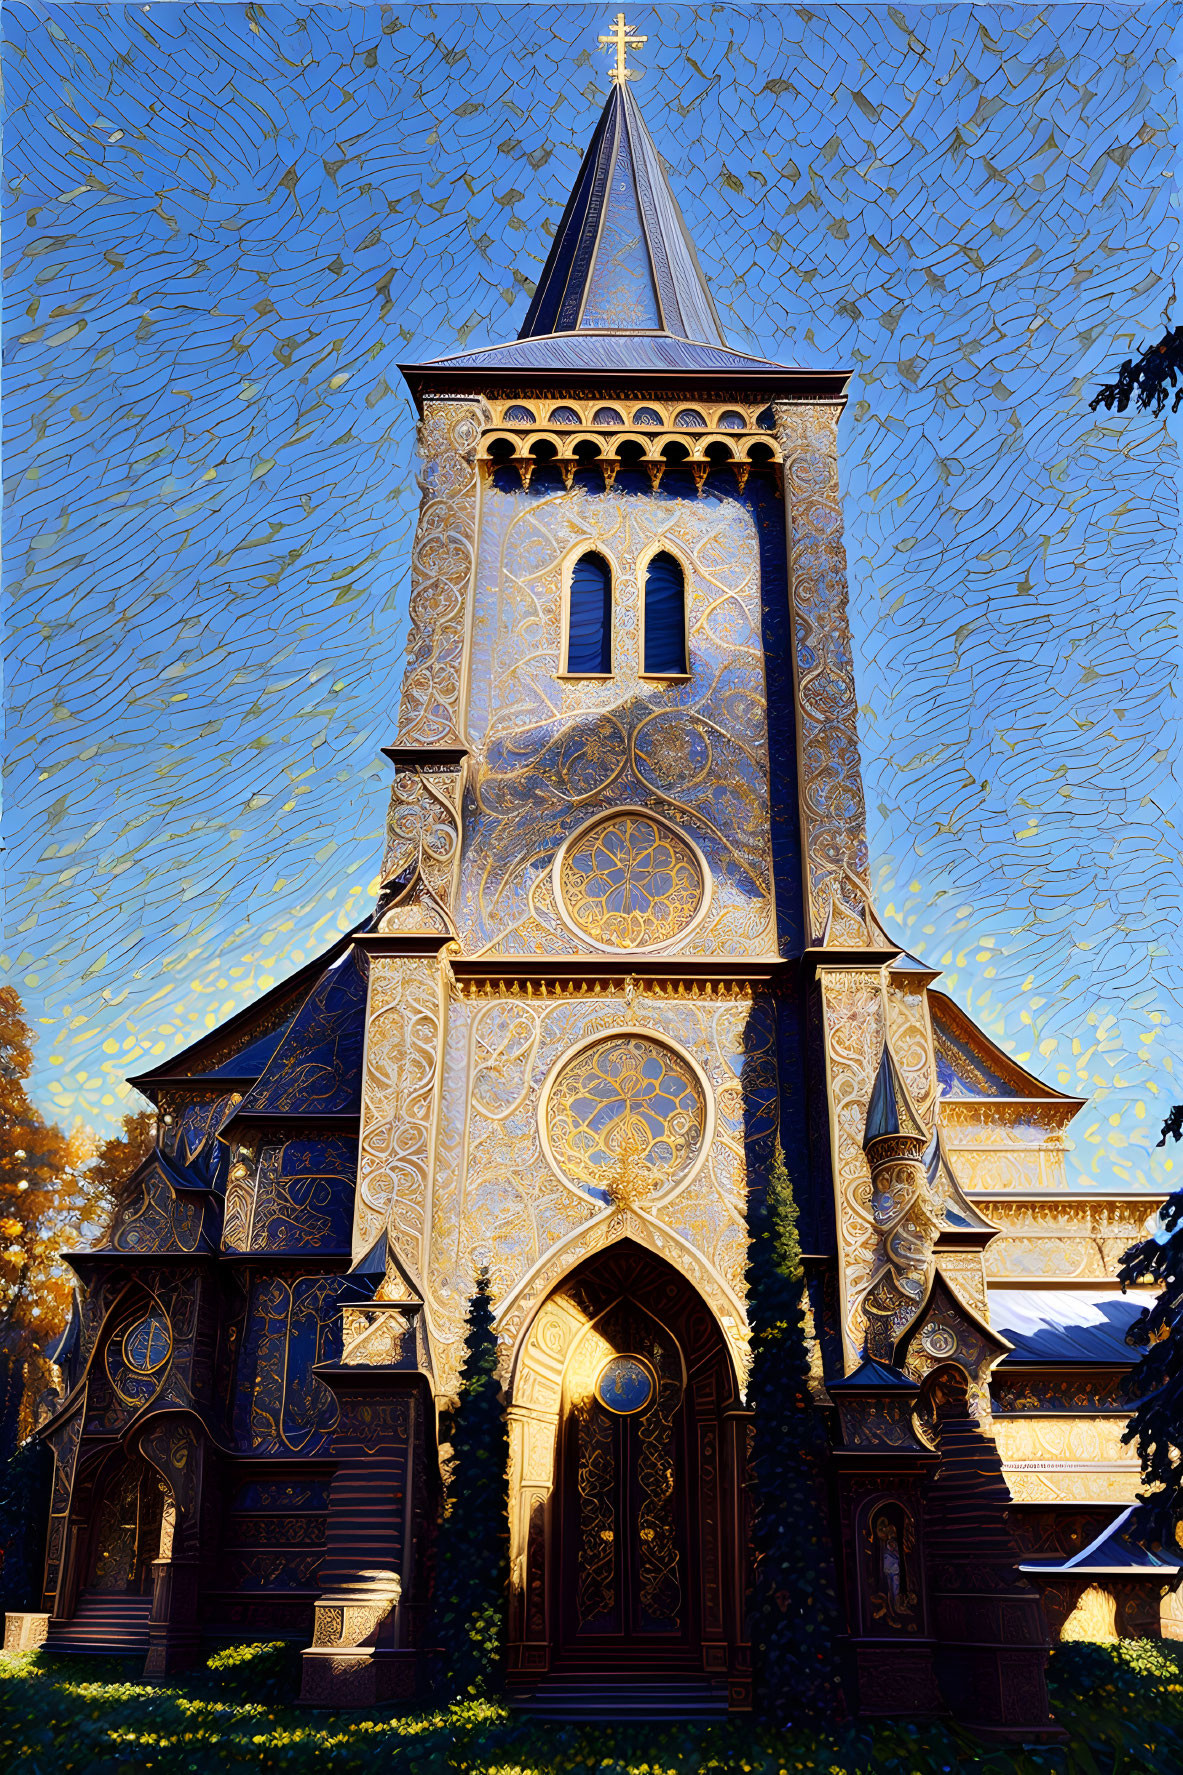 Intricate church with tall steeple against blue sky and trees